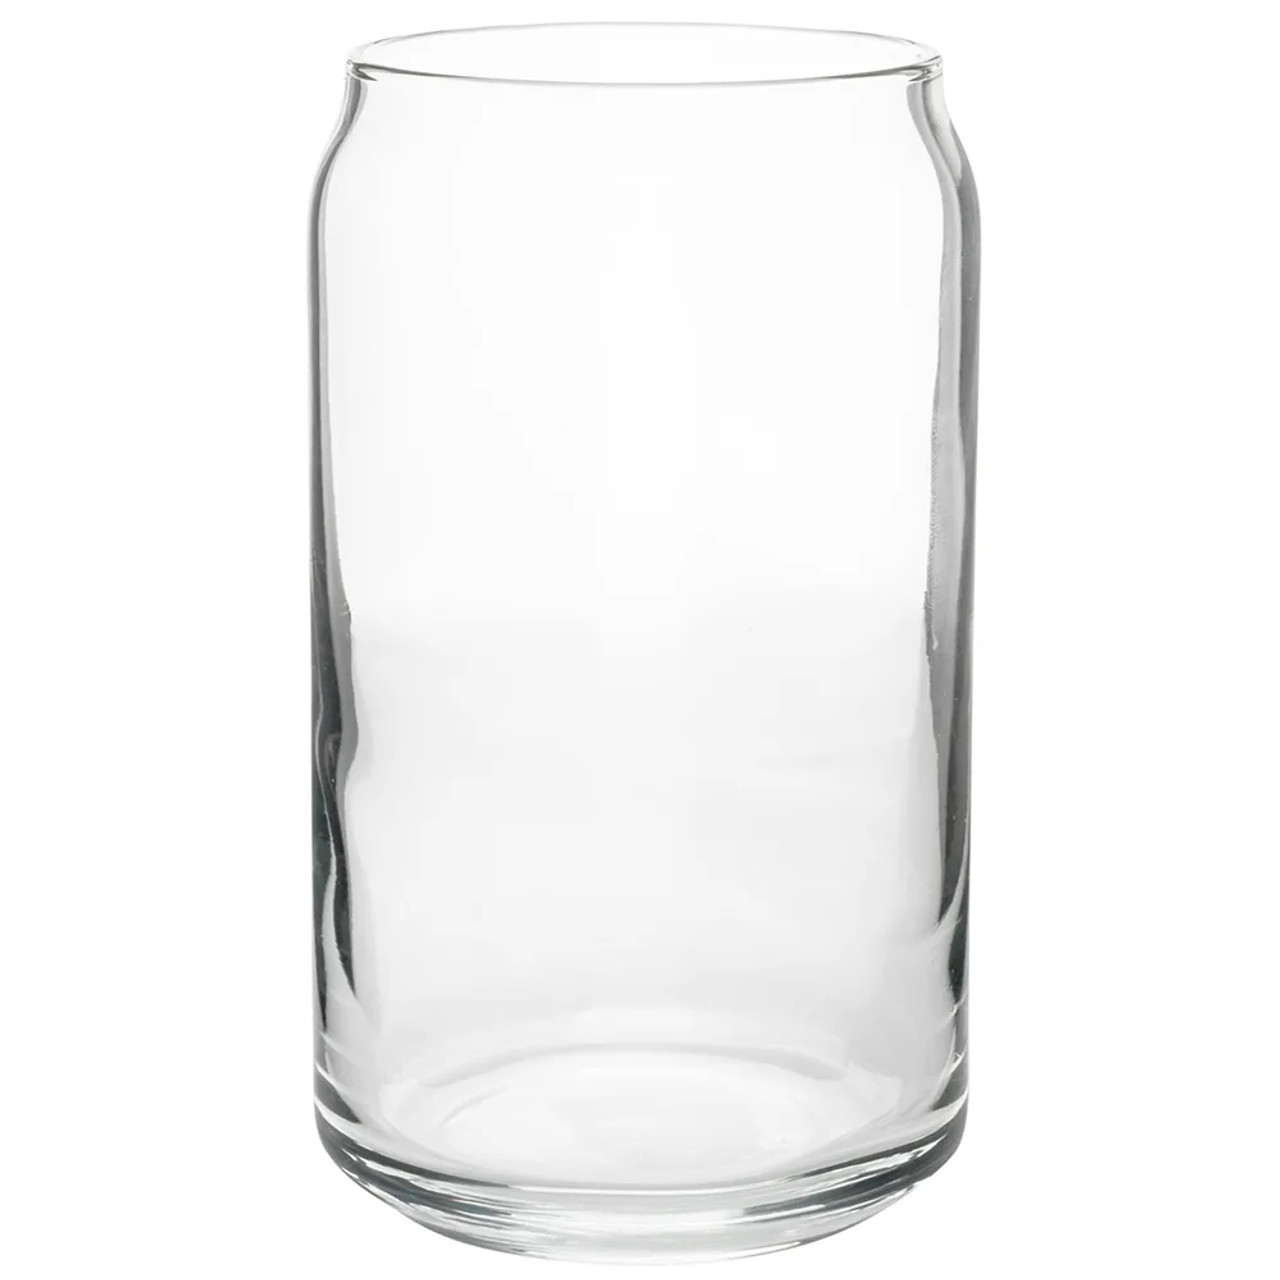 Libbey 209 16 oz Beer Can Glass - Safedge Rim, Clear, Novelty Shape (12/Case) - Chicken Pieces